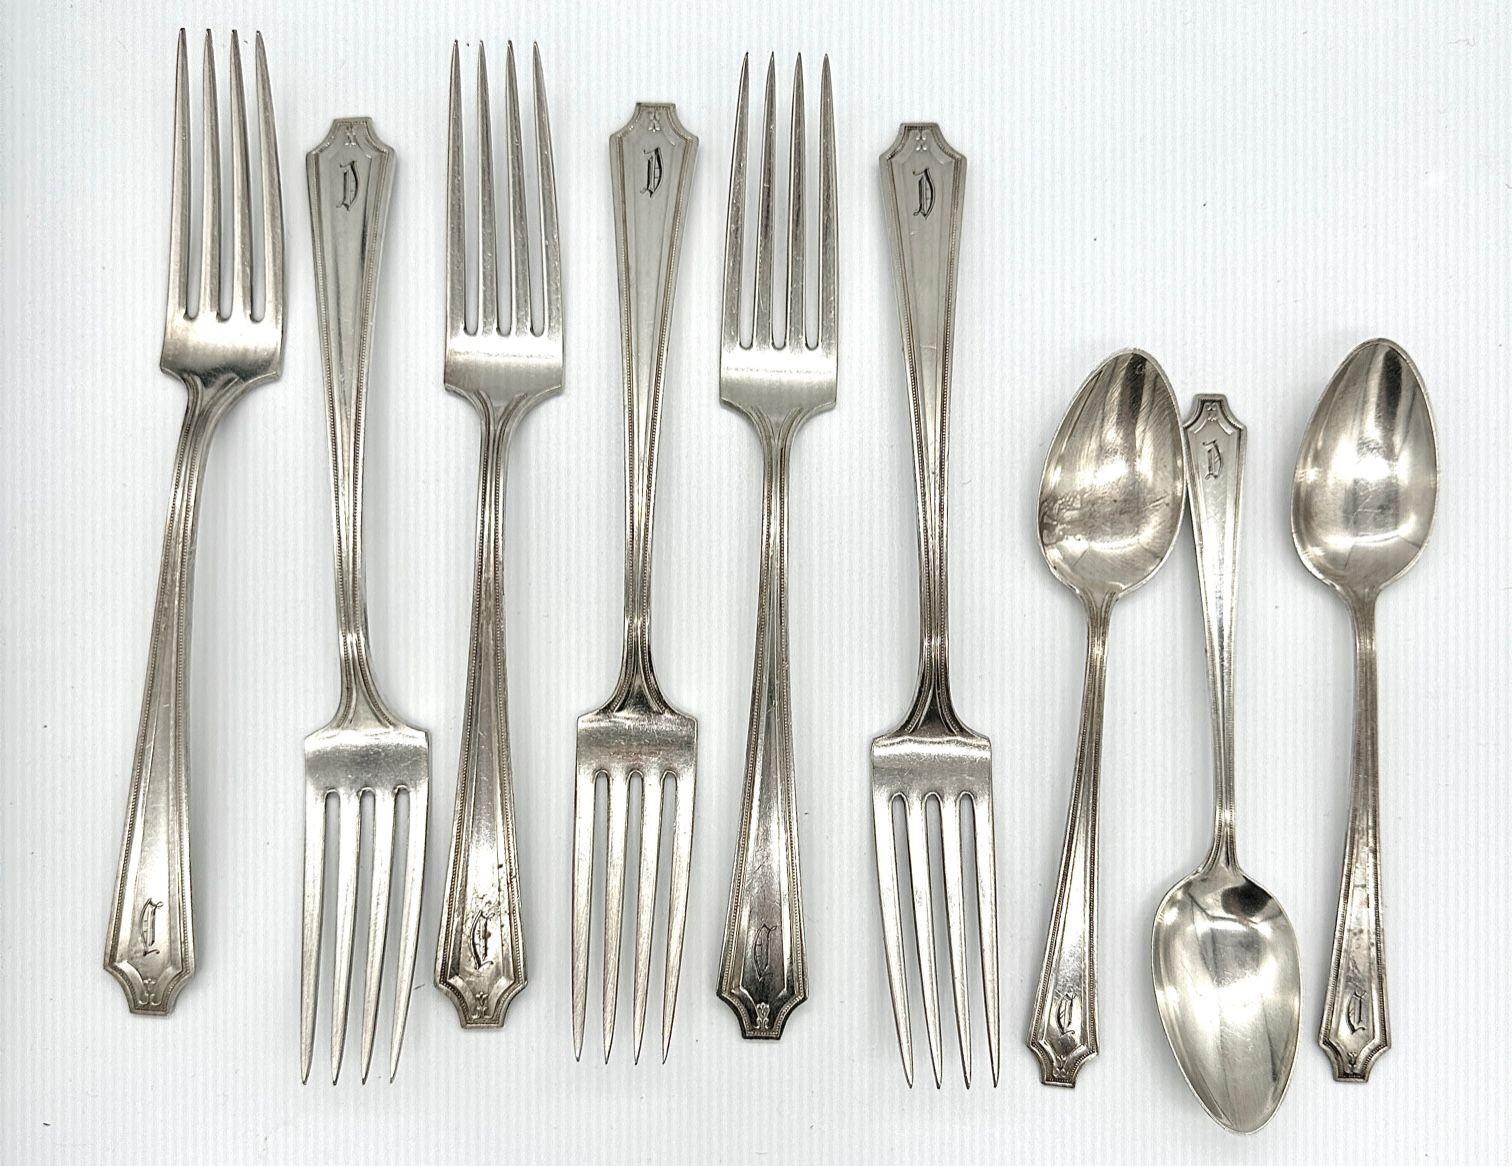 Art Deco Old French King Albert Sterling Silverware Set of 15 by Whiting Manf Co